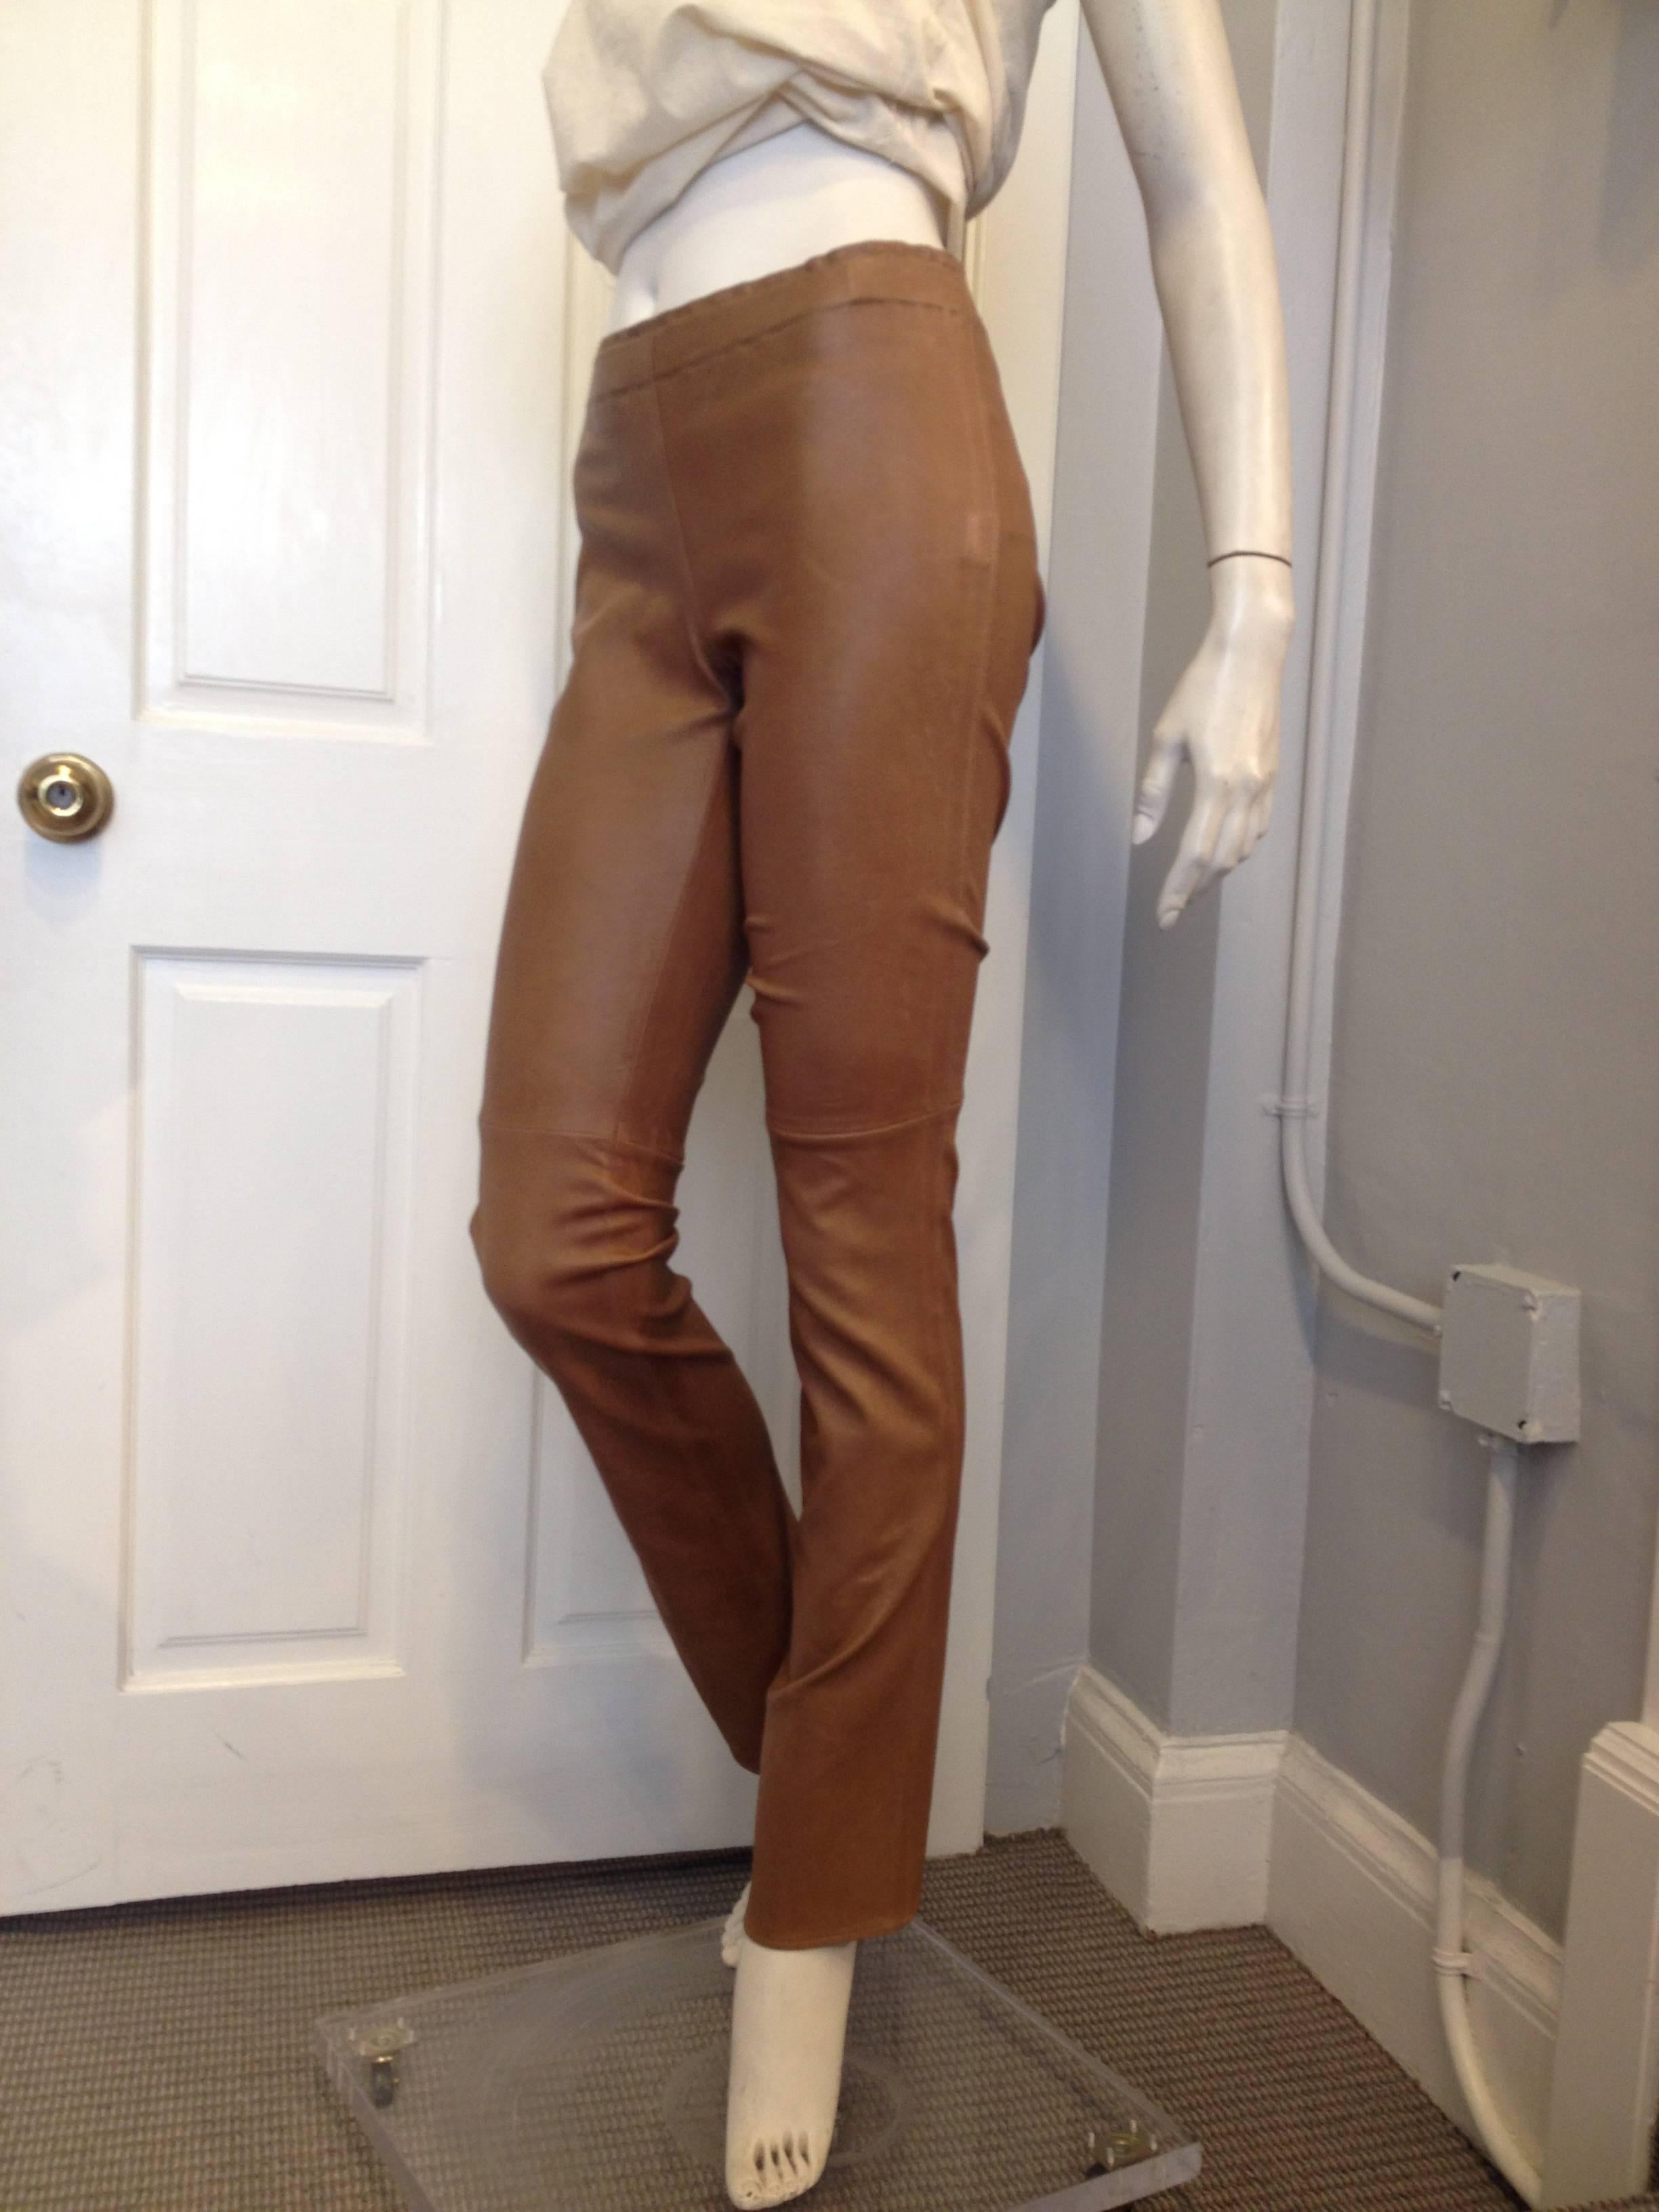 Beautifully soft leather and a classic fit make this leather pant by Stouls truly timeless. The straight leg and elasticized waistband are easy and casual, while the deep caramelly color and the ultrasoft texture are totally luxurious. Stouls is